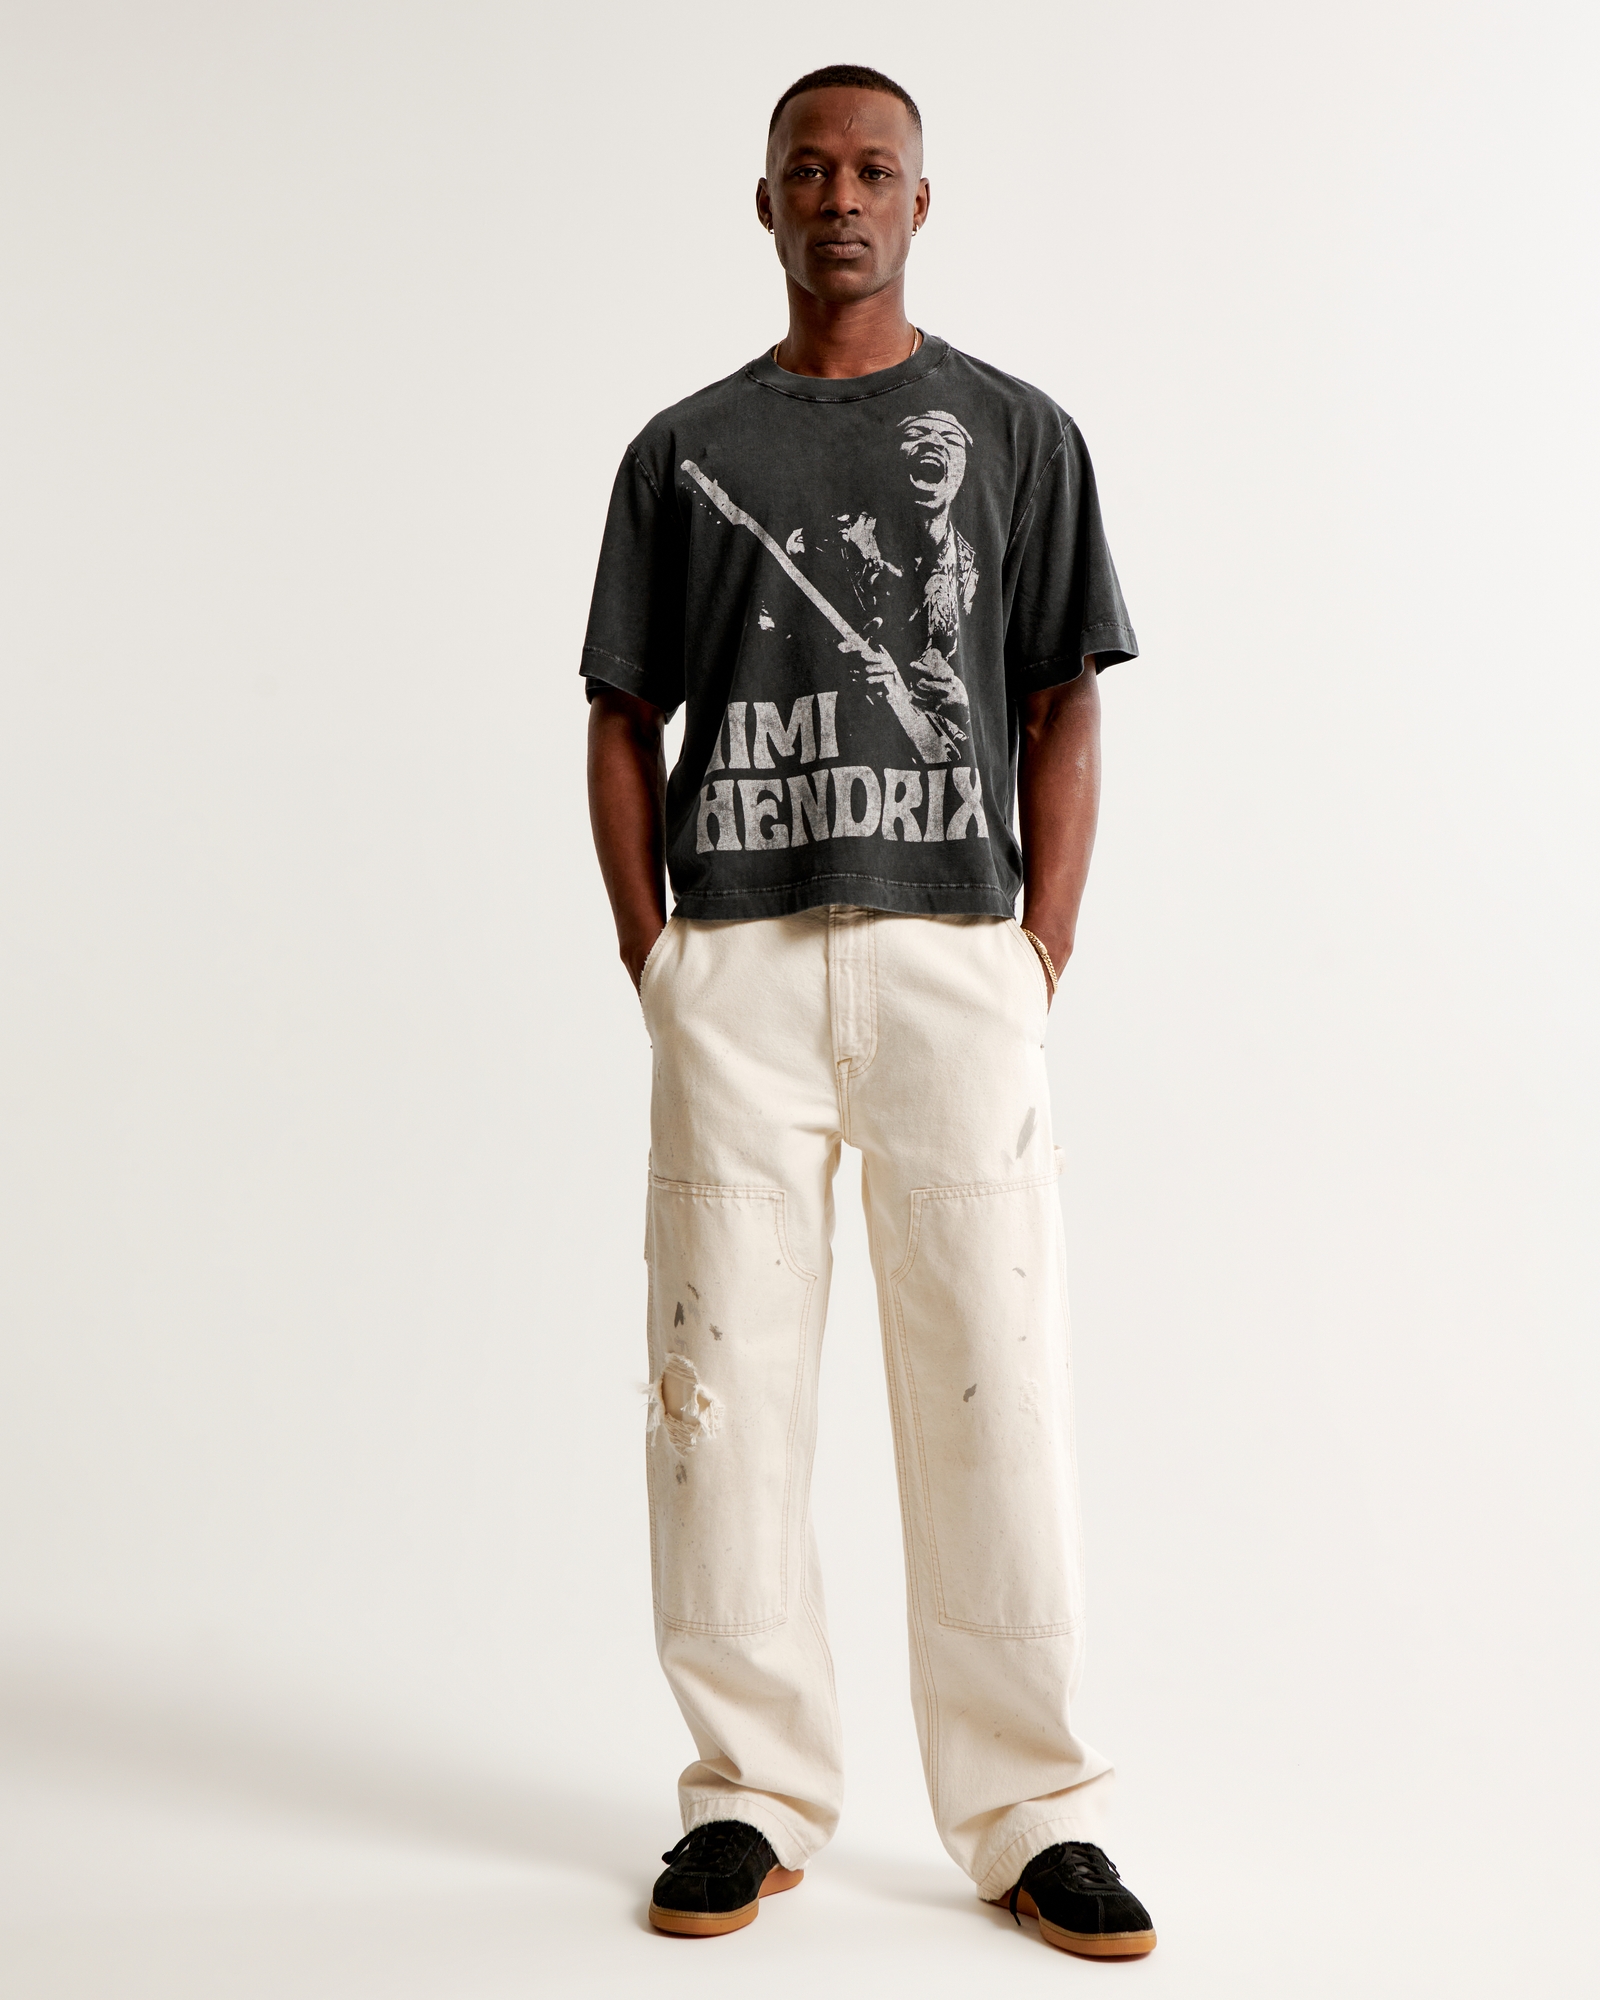 Gender Inclusive Cropped Nirvana Graphic Tee, Gender Inclusive Gender  Inclusive